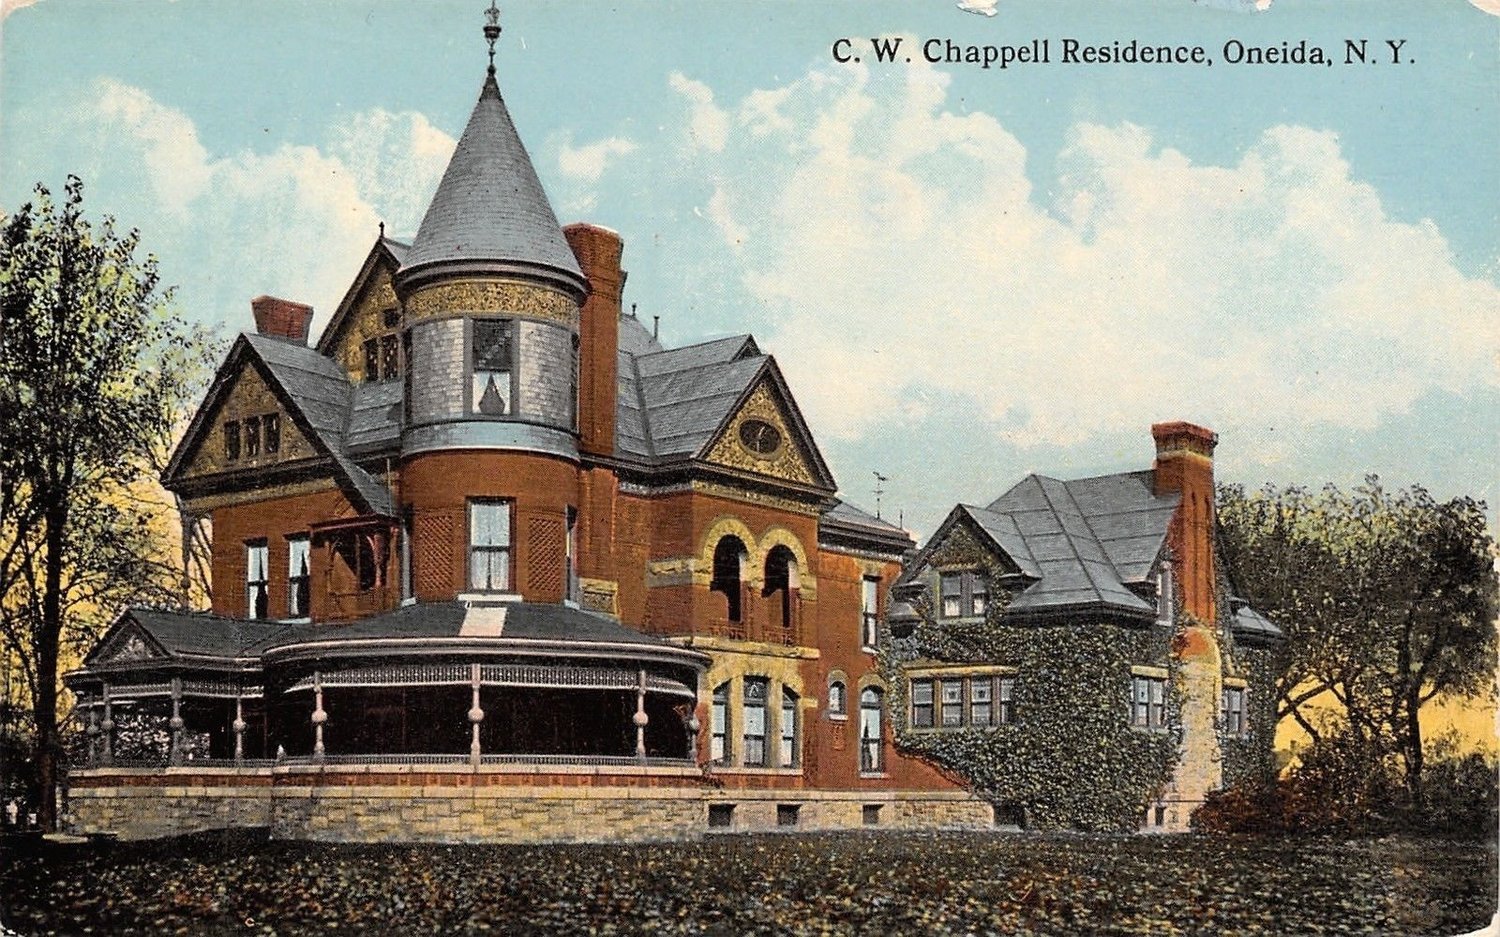 This grand property in Oneida belonged to C. Will Chappell, one of the founders of National Casket Company.